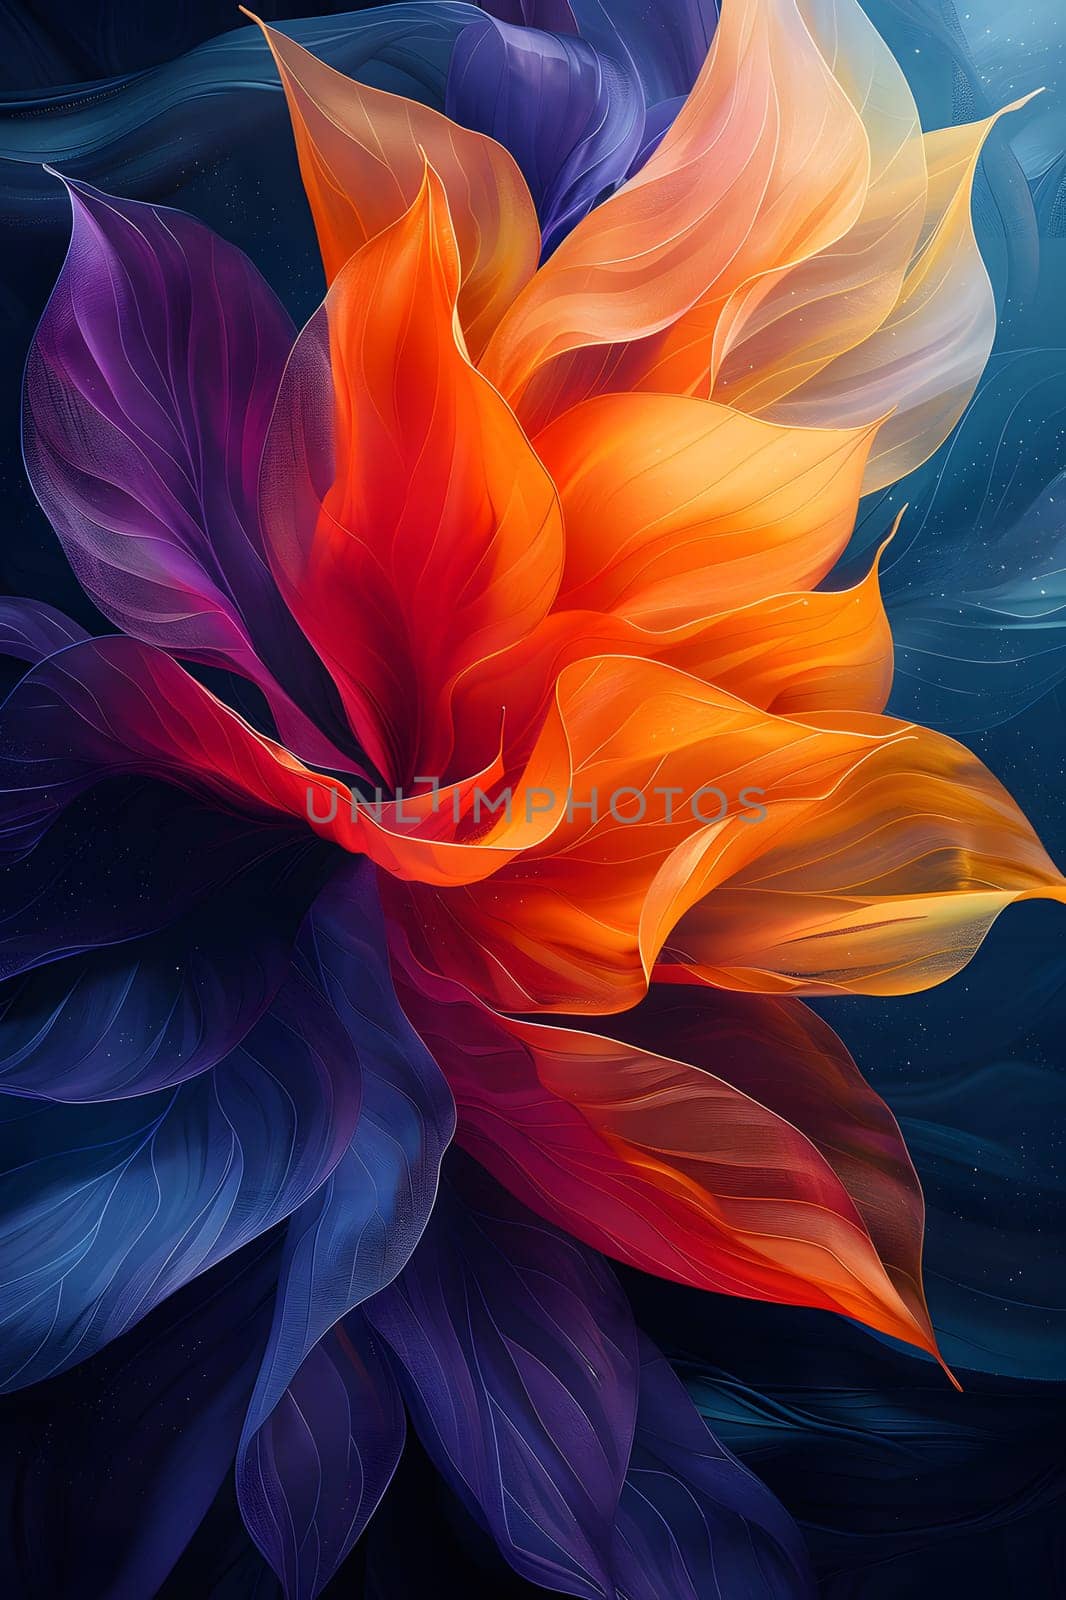 Closeup of a vibrant orange flower on a dark background by Nadtochiy